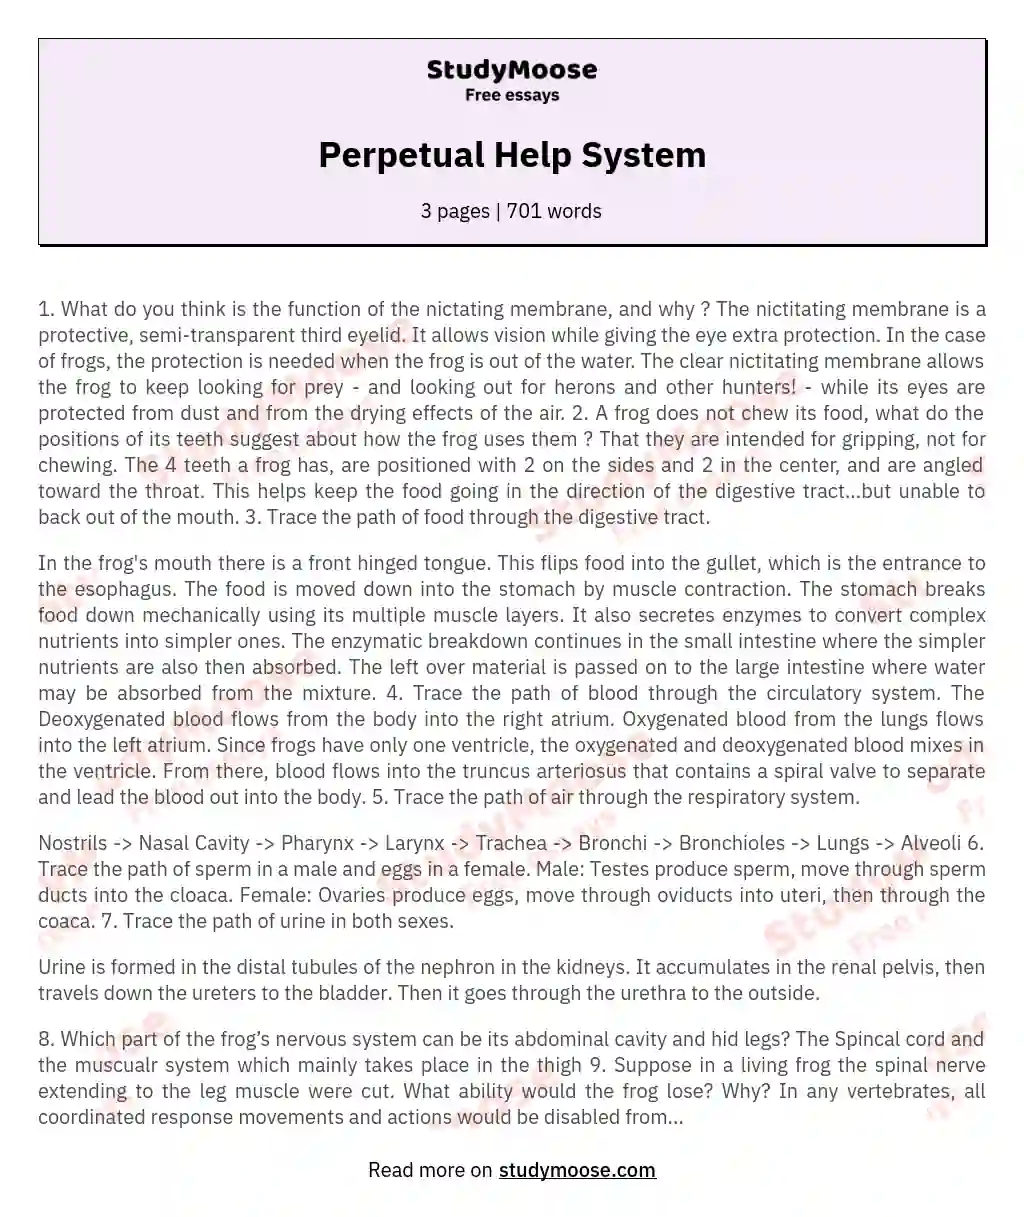 Perpetual Help System essay